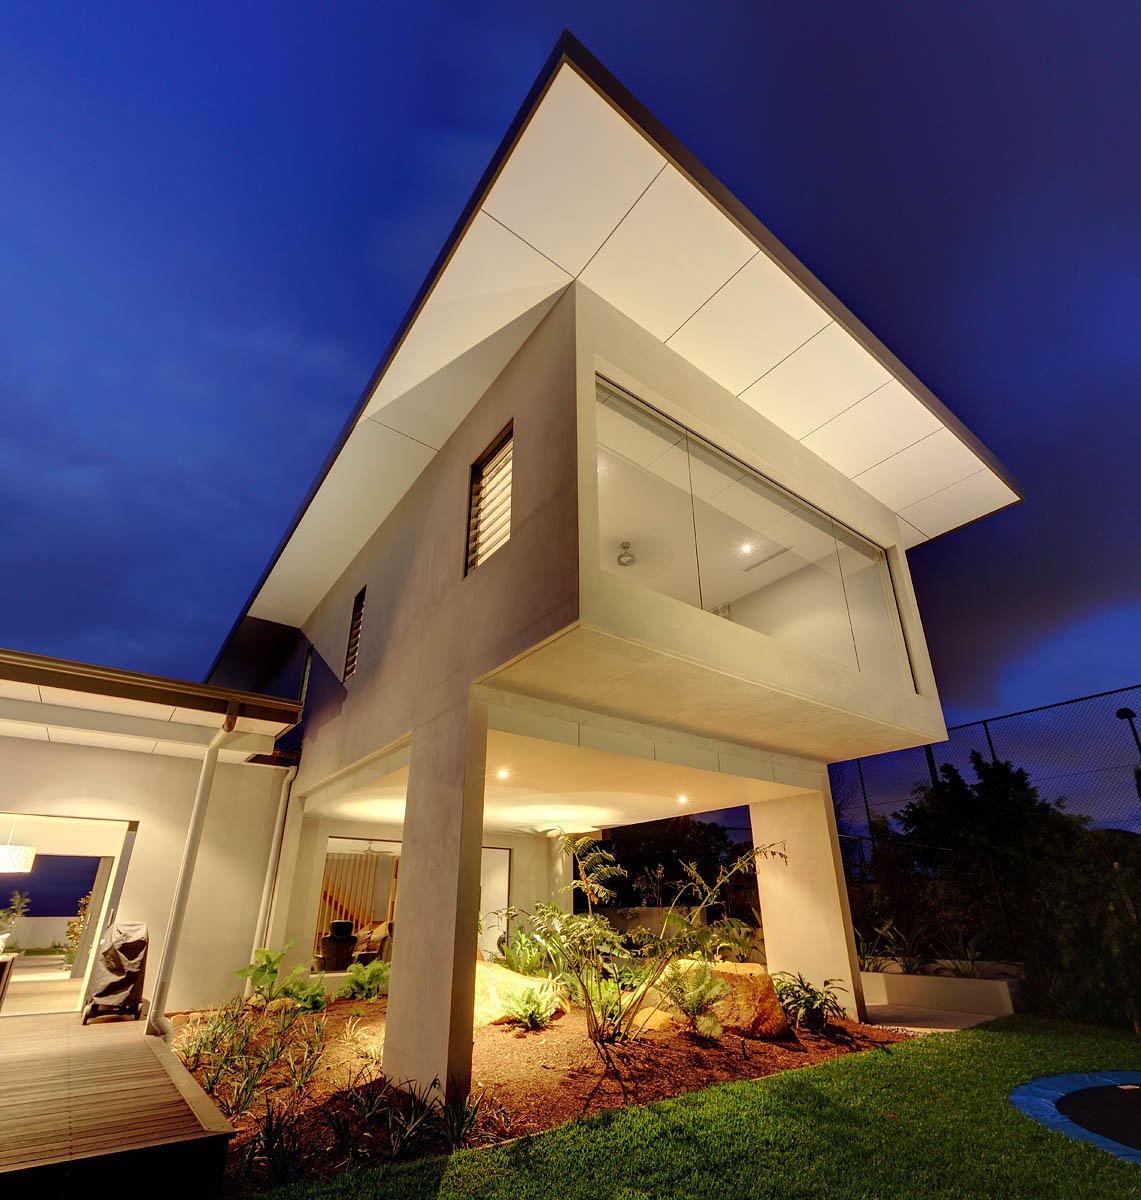 Mountain Top Court project by mdesign, a building design practice that operates on the Sunshine Coast.